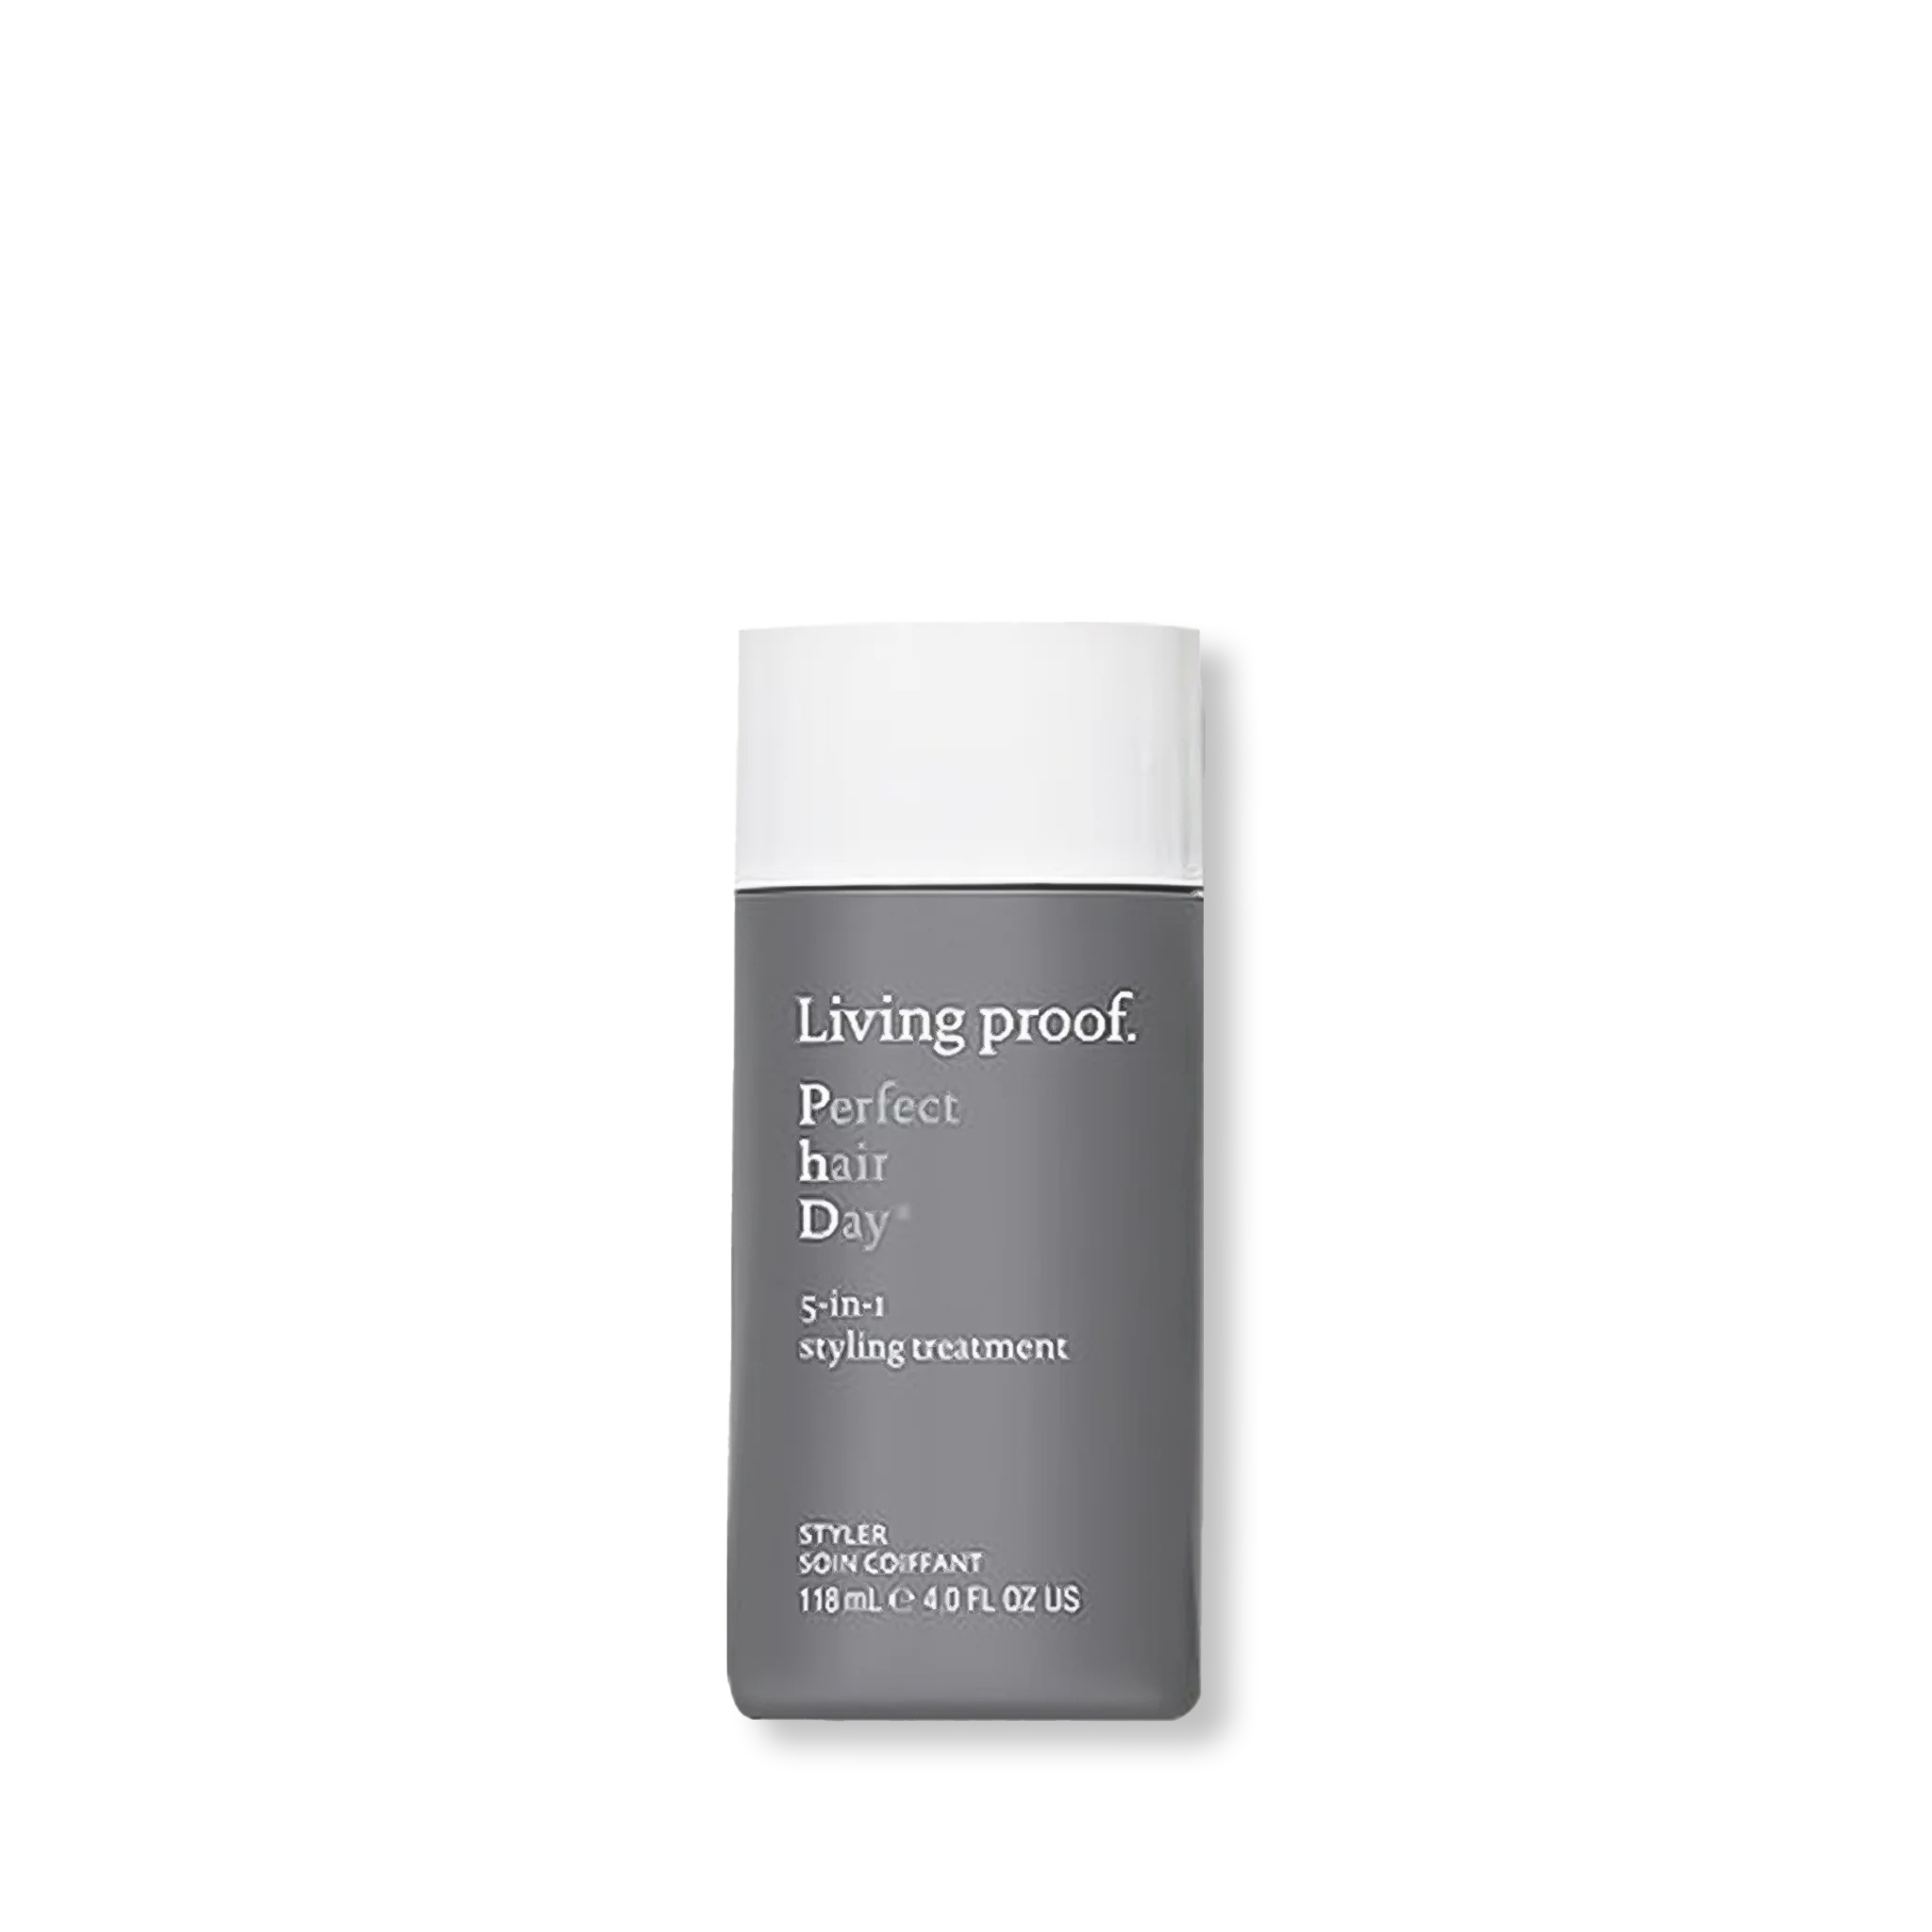 Living Proof PhD 5 in 1 Styling Treatment